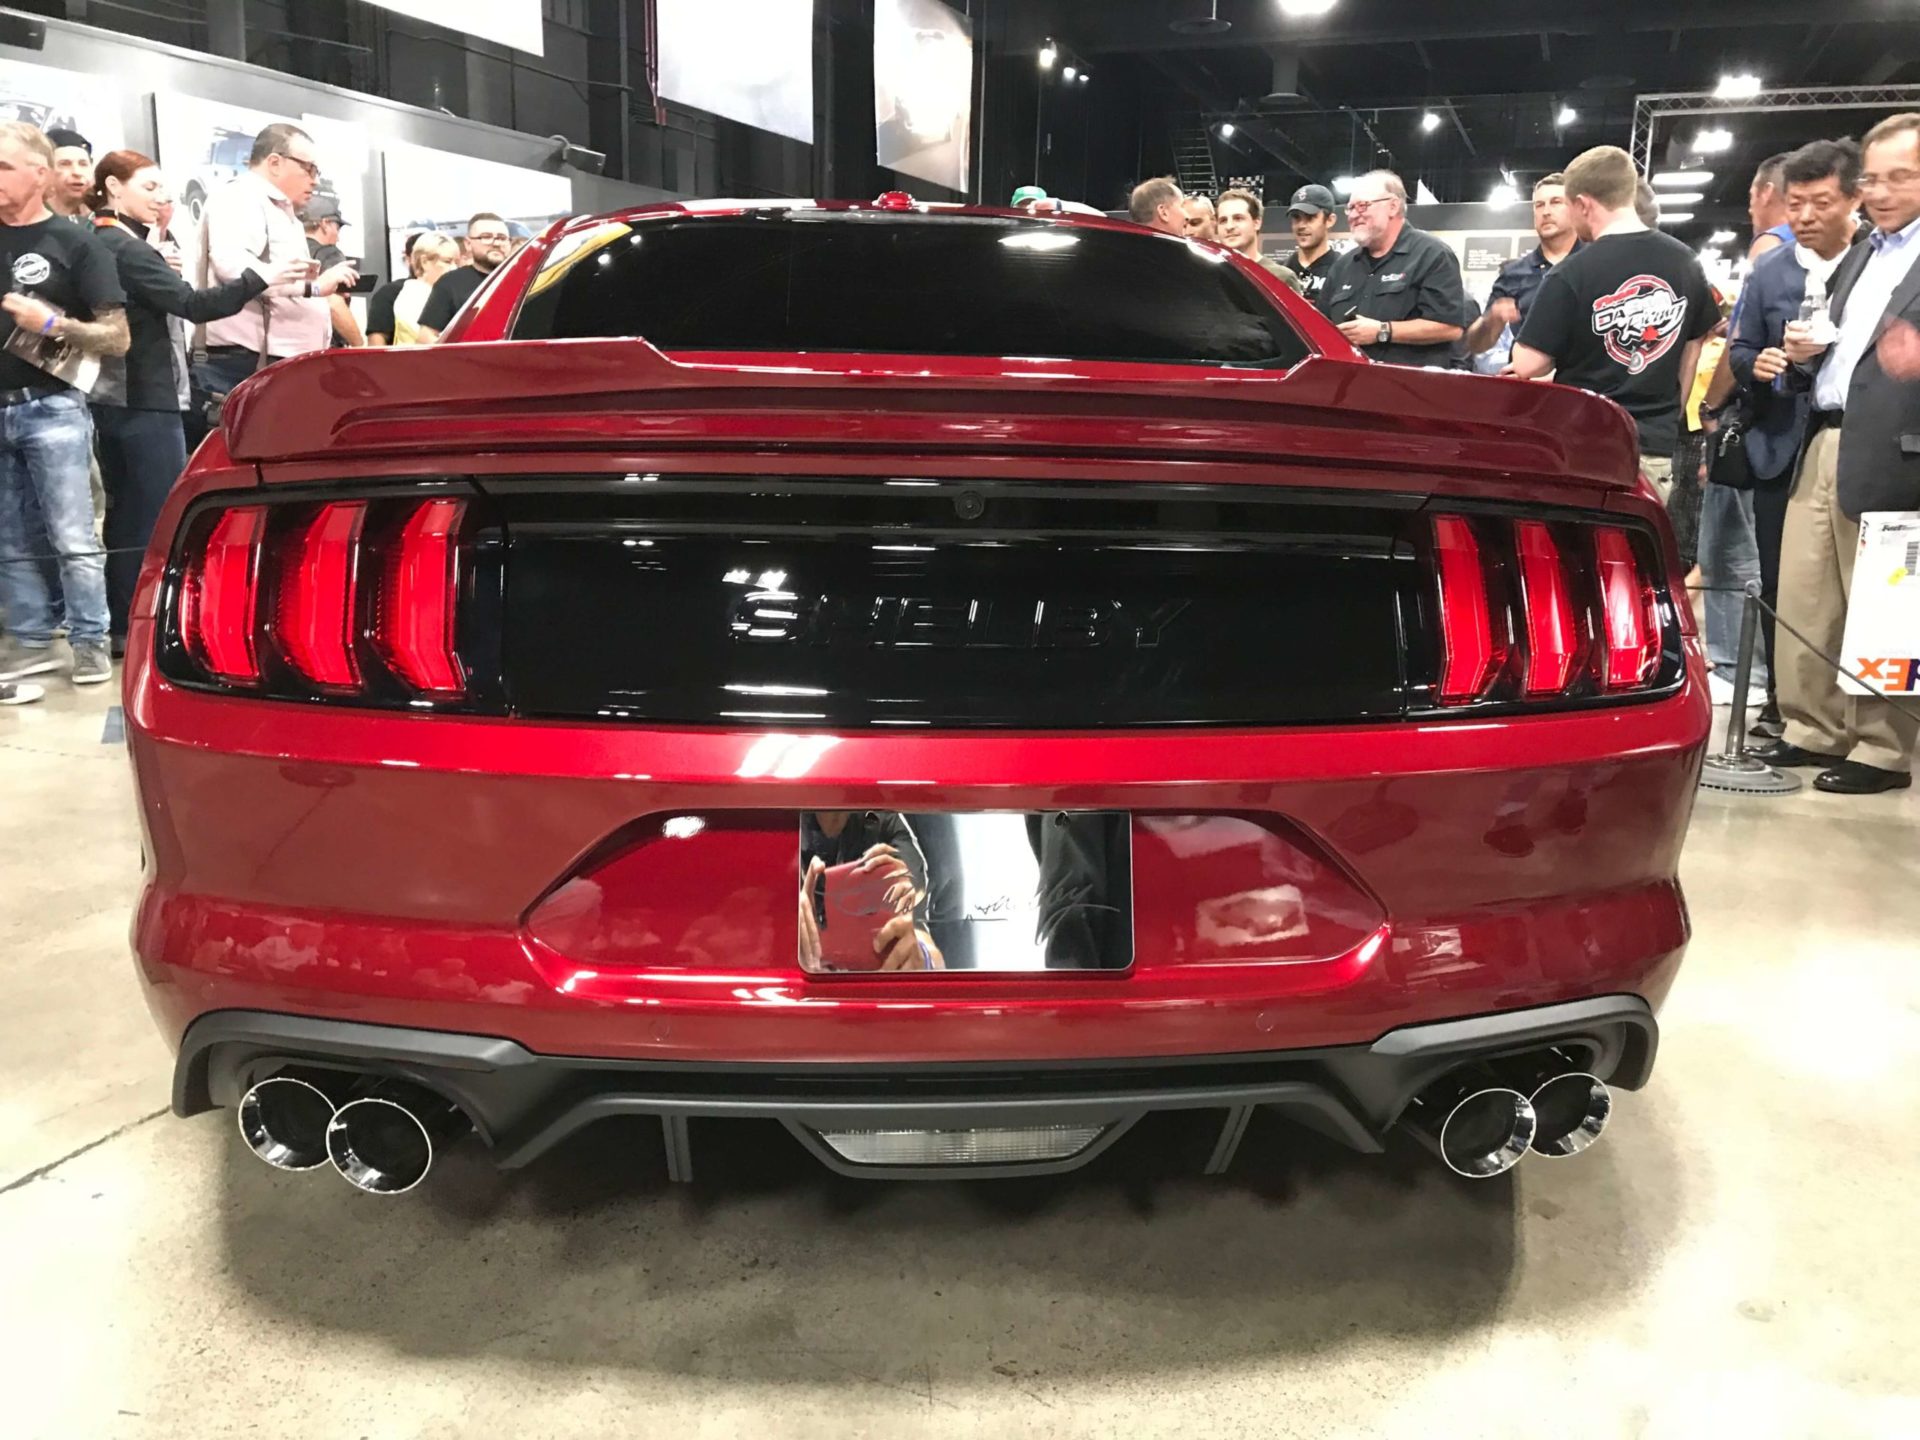 2018 shelby 1000 5.2l whipple supercharger